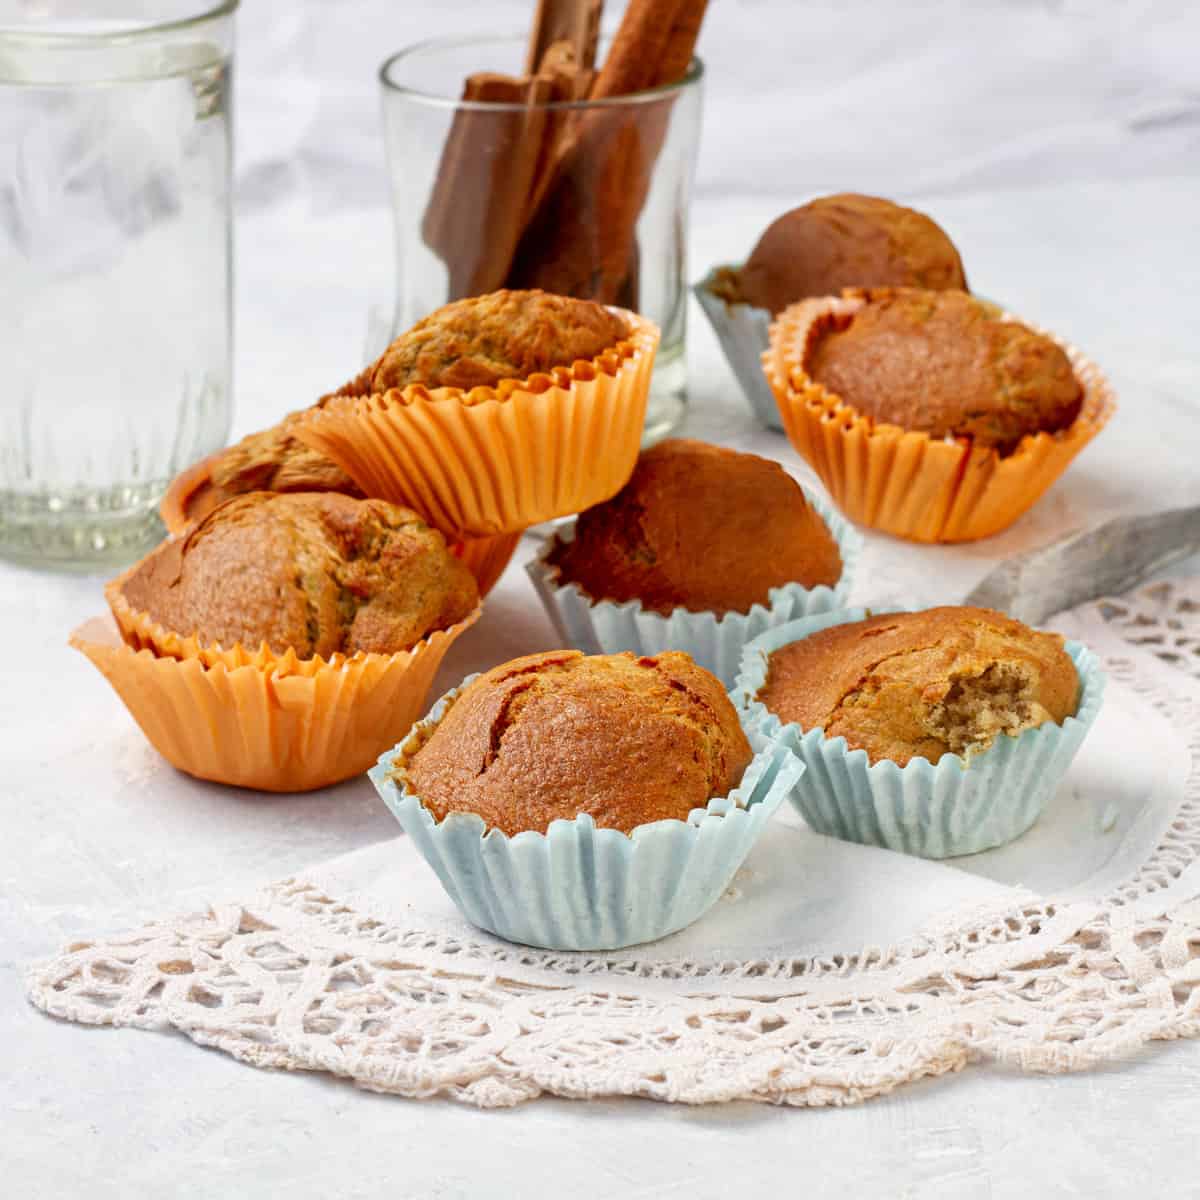 Warm and naturally sweetened Weight Watchers Cinnamon Muffins arranged on a plate.